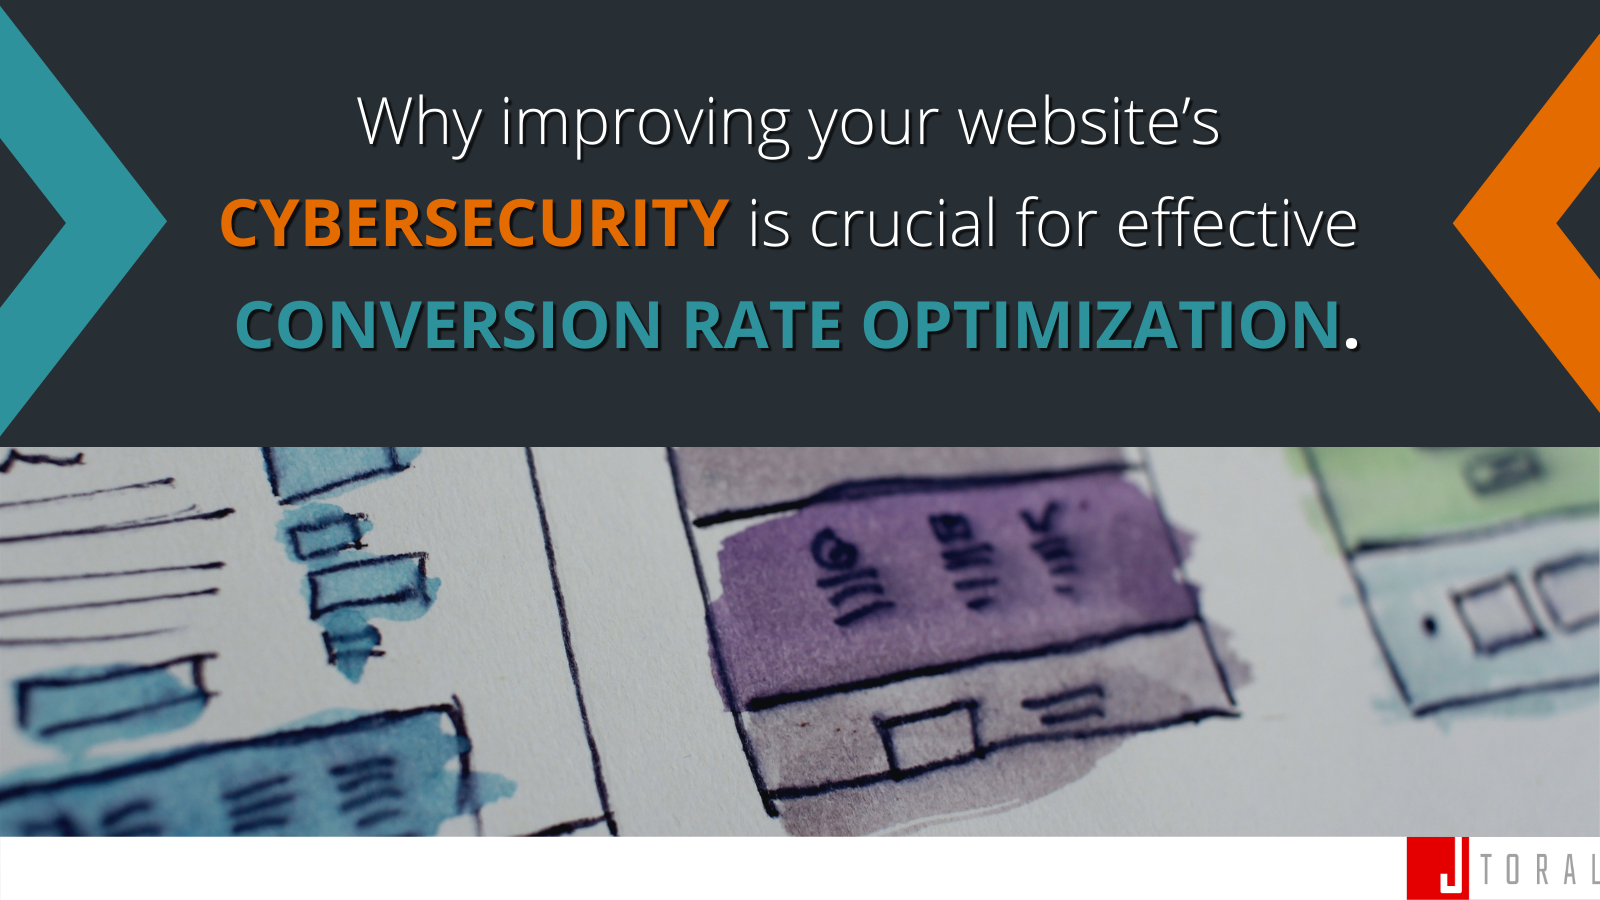 Why improving your website’s cyber security is crucial for effective conversion rate optimization